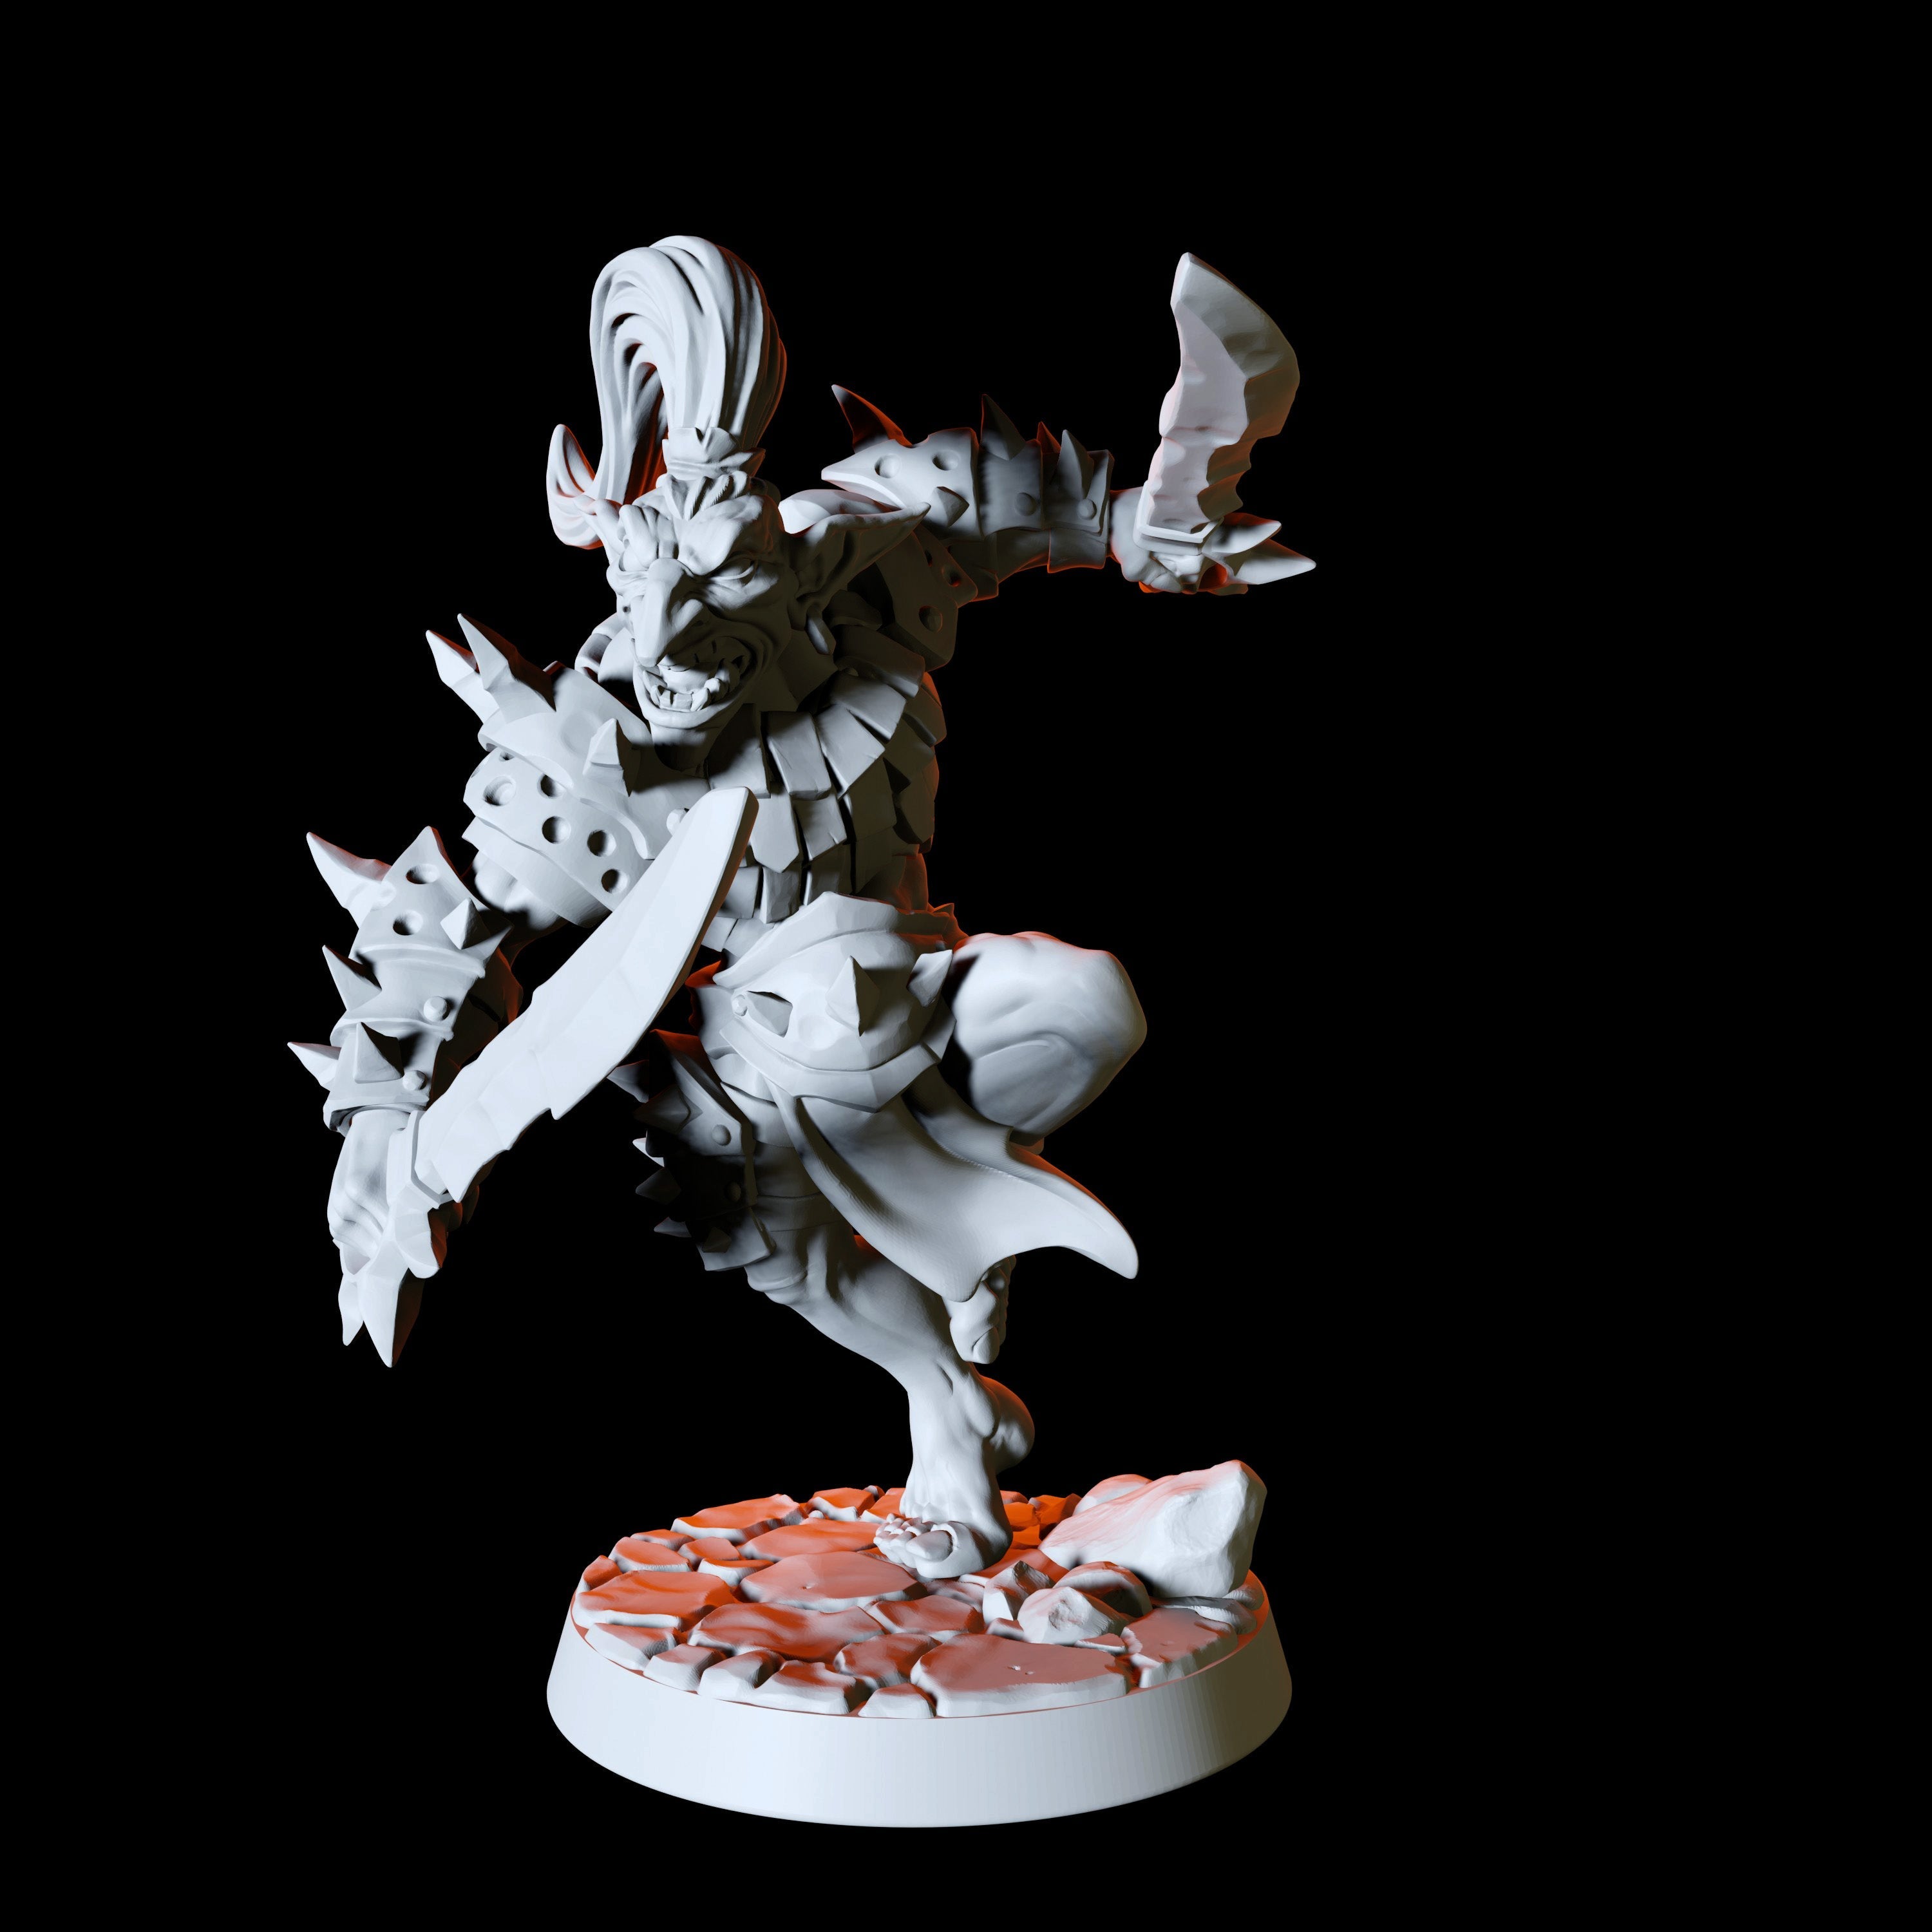 Duel Sword Wielding Hobgoblin Miniature for Dungeons and Dragons - Myth Forged